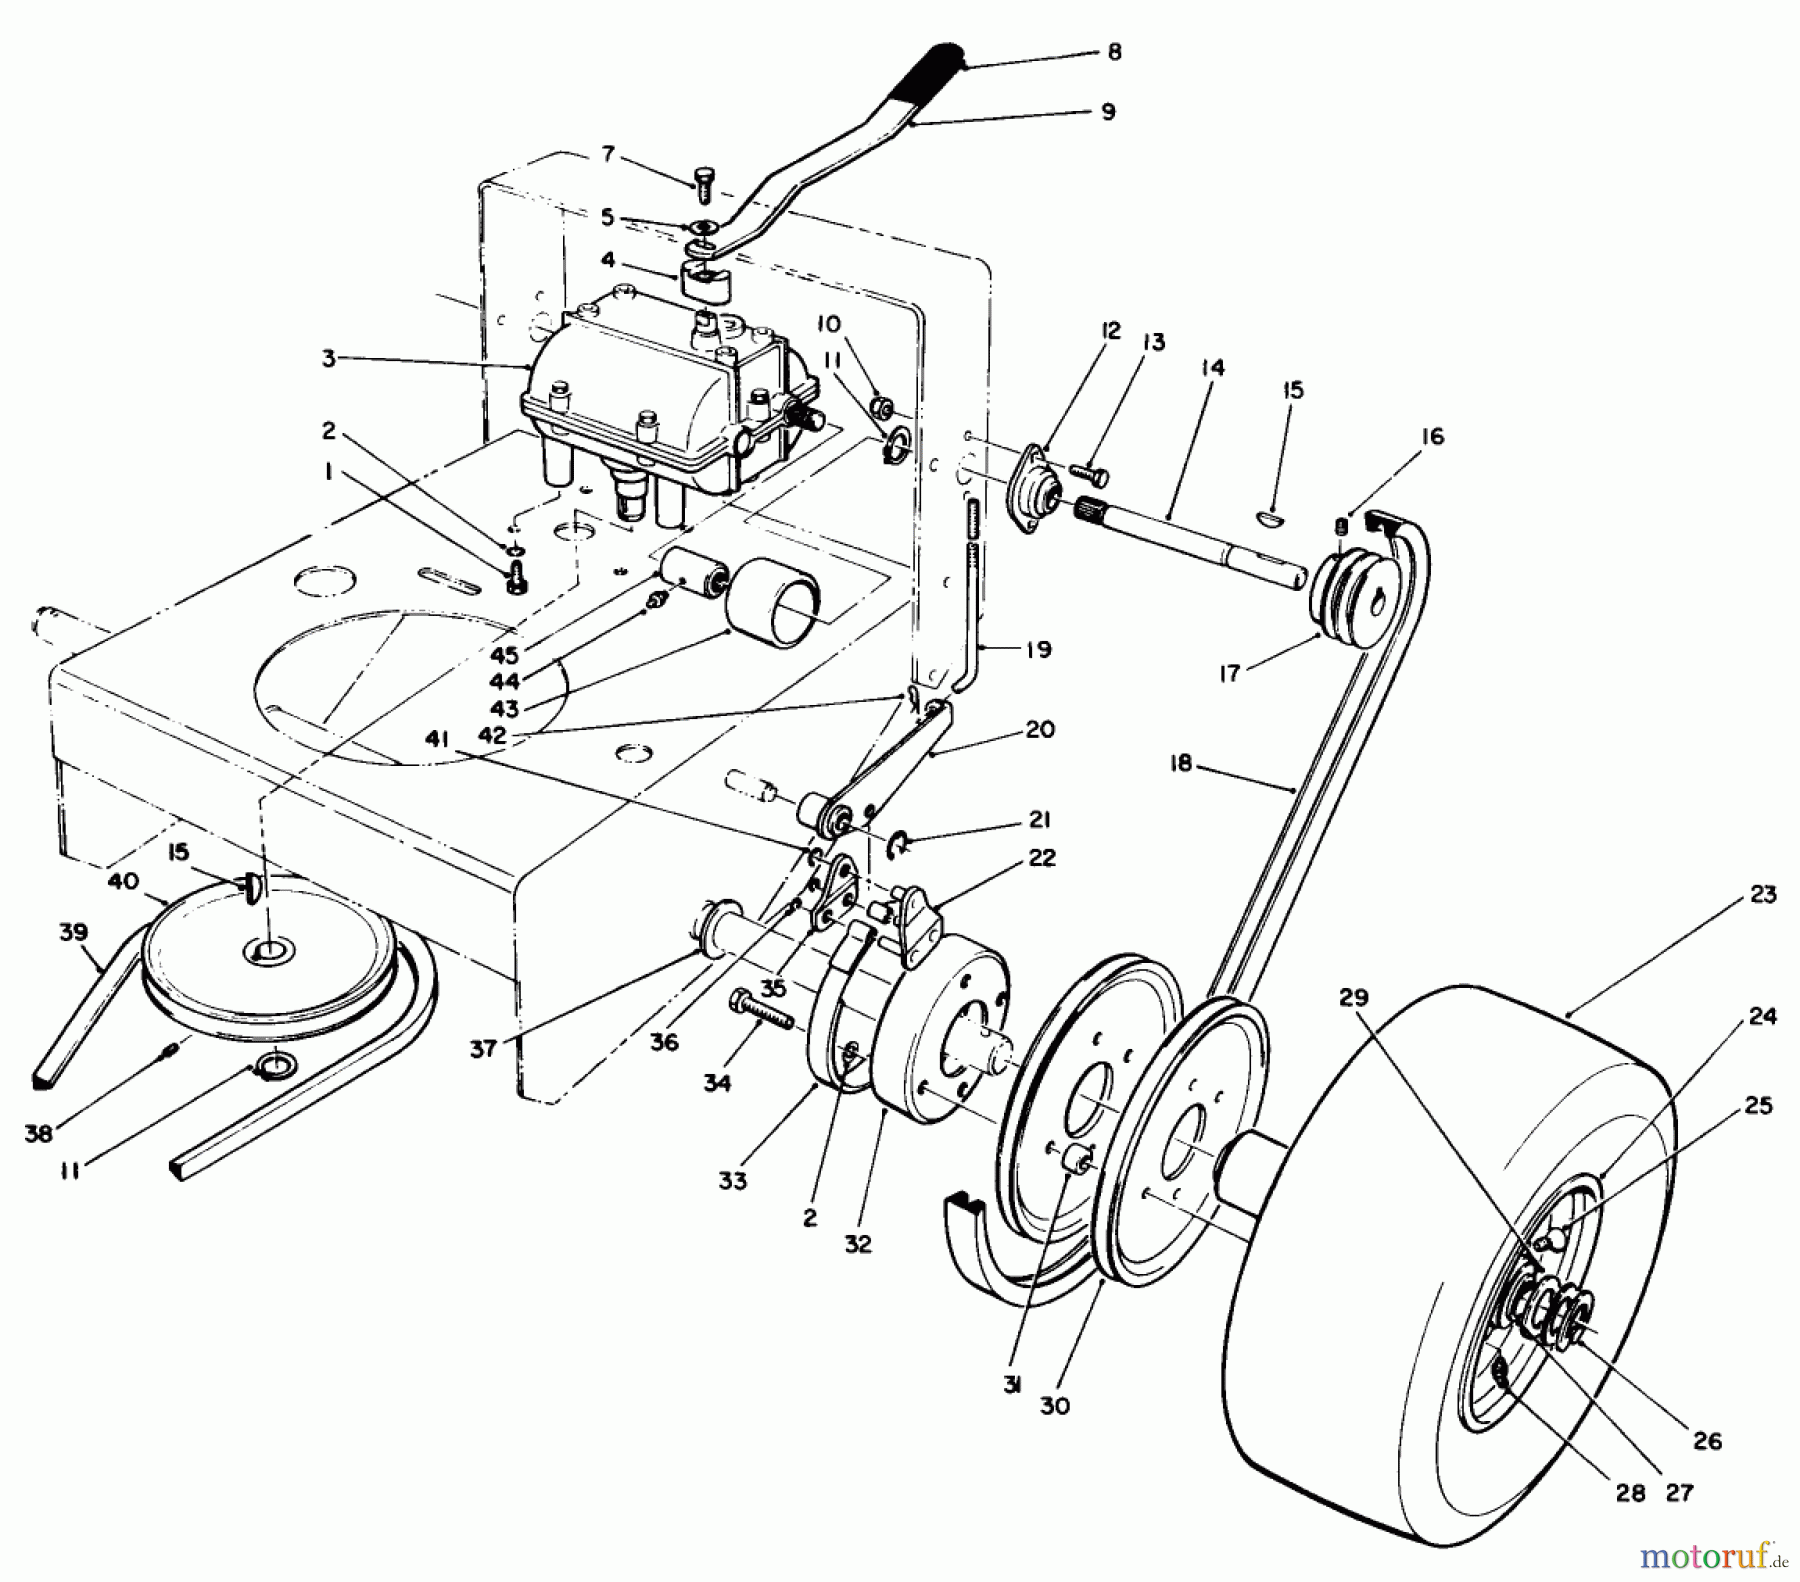  Toro Neu Mowers, Drive Unit Only 30102 - Toro Mid-Size Proline Gear Traction Unit, 12 hp, 1991 (1000001-1999999) AXLE ASSEMBLY